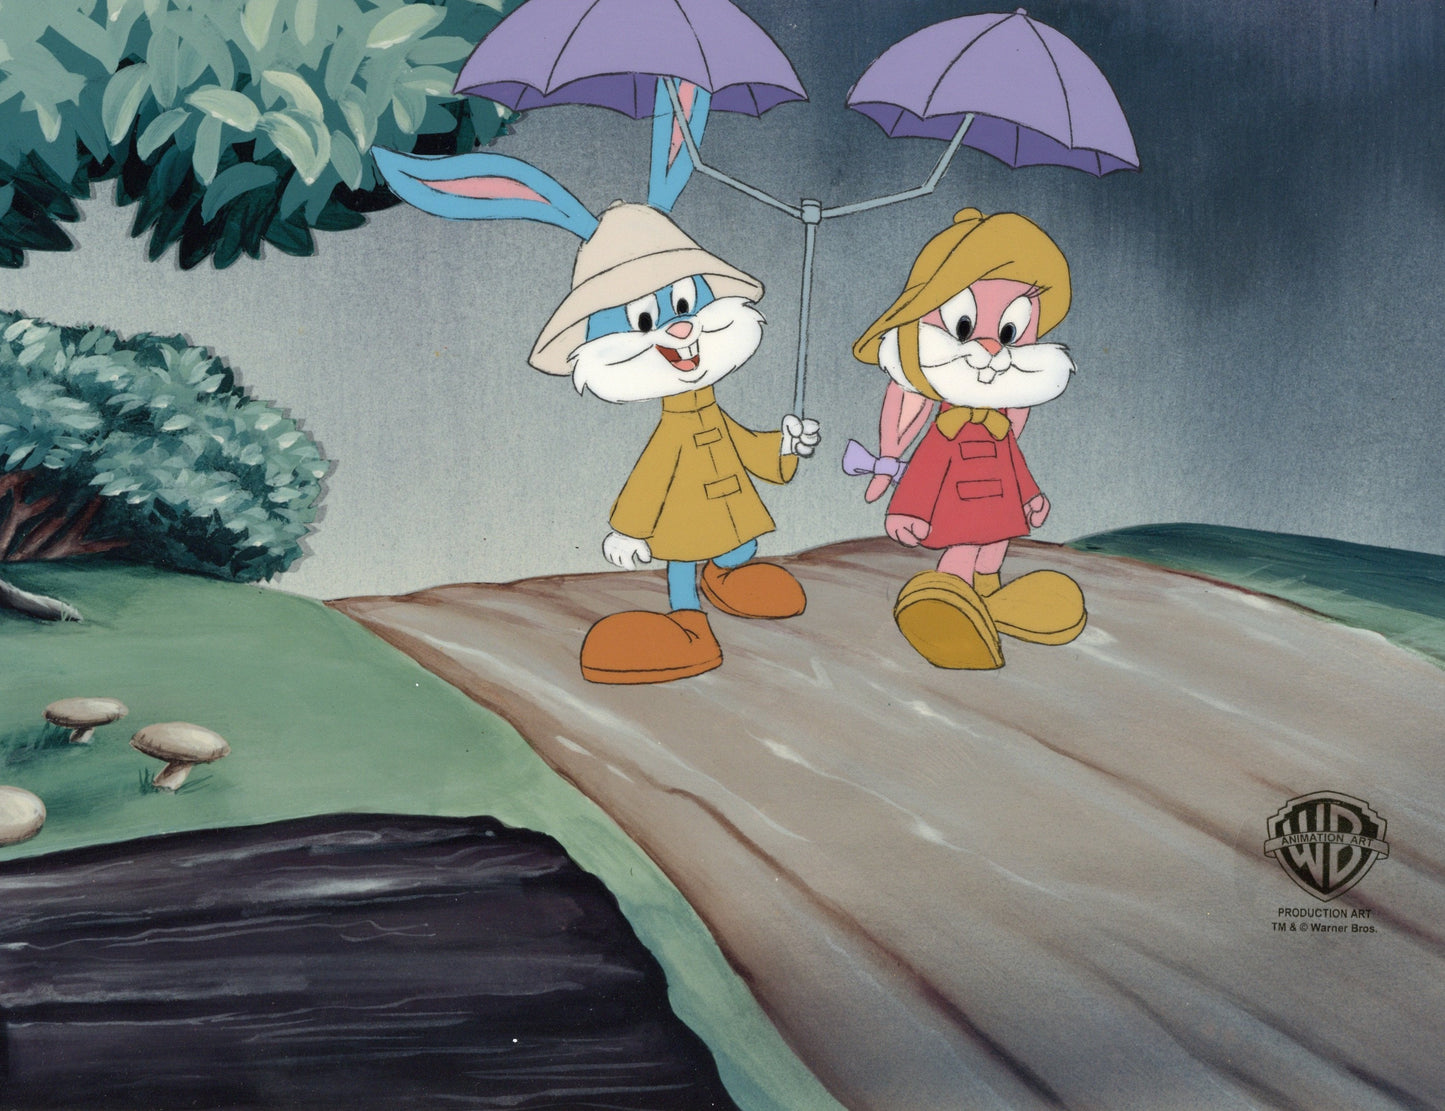 Tiny Toons Adventures Original Production Cel: Buster and Babs Bunny